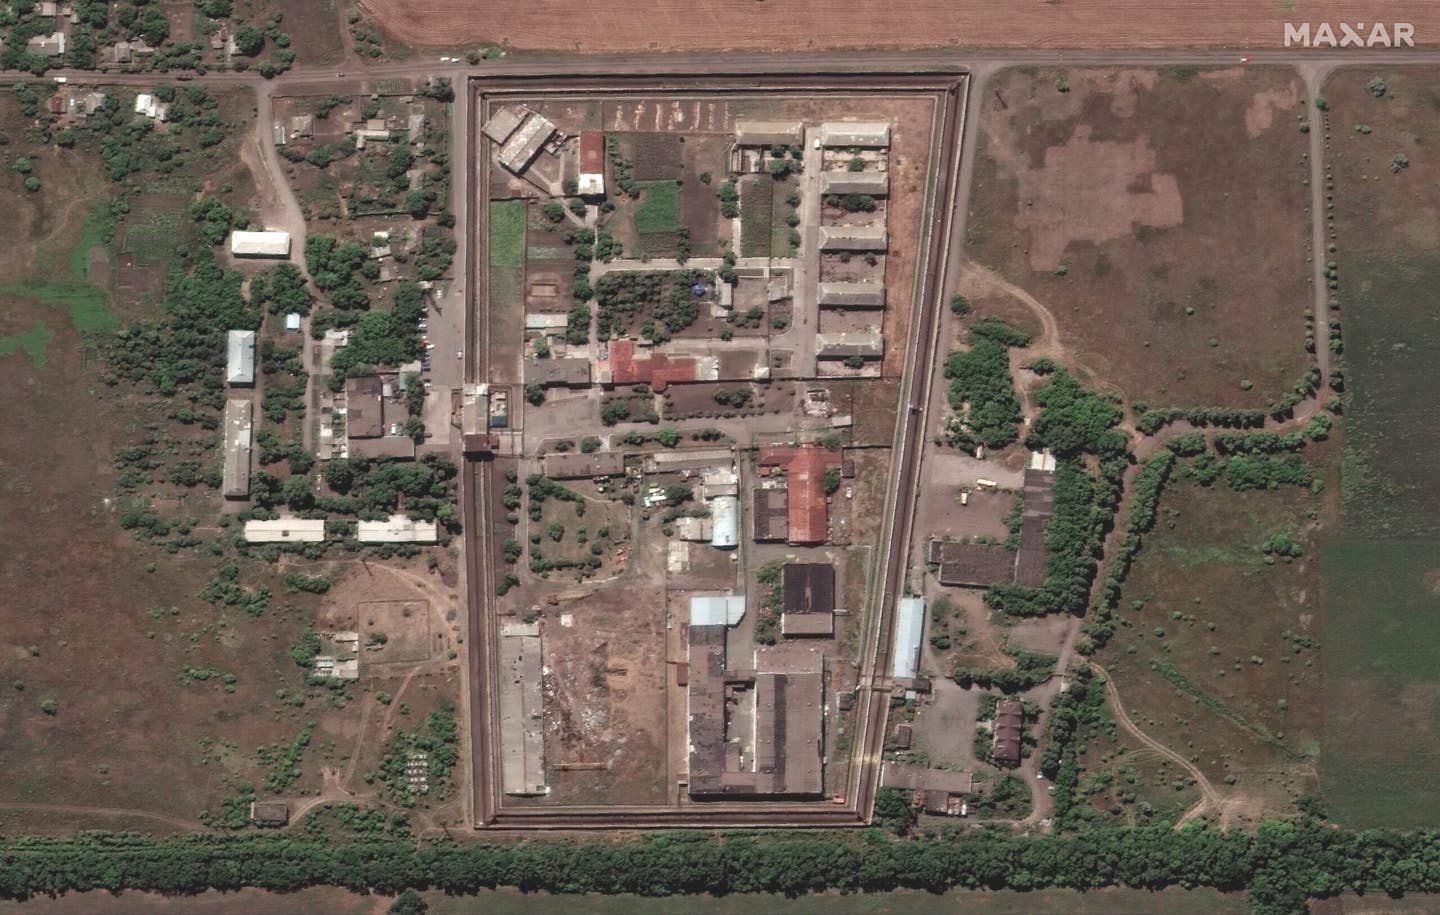 A satellite image of Olenivka prison from July 27 with seven vertical lines of open graves near the south wall at the top of the image. (Maxar Technologies / July 27, 2022).